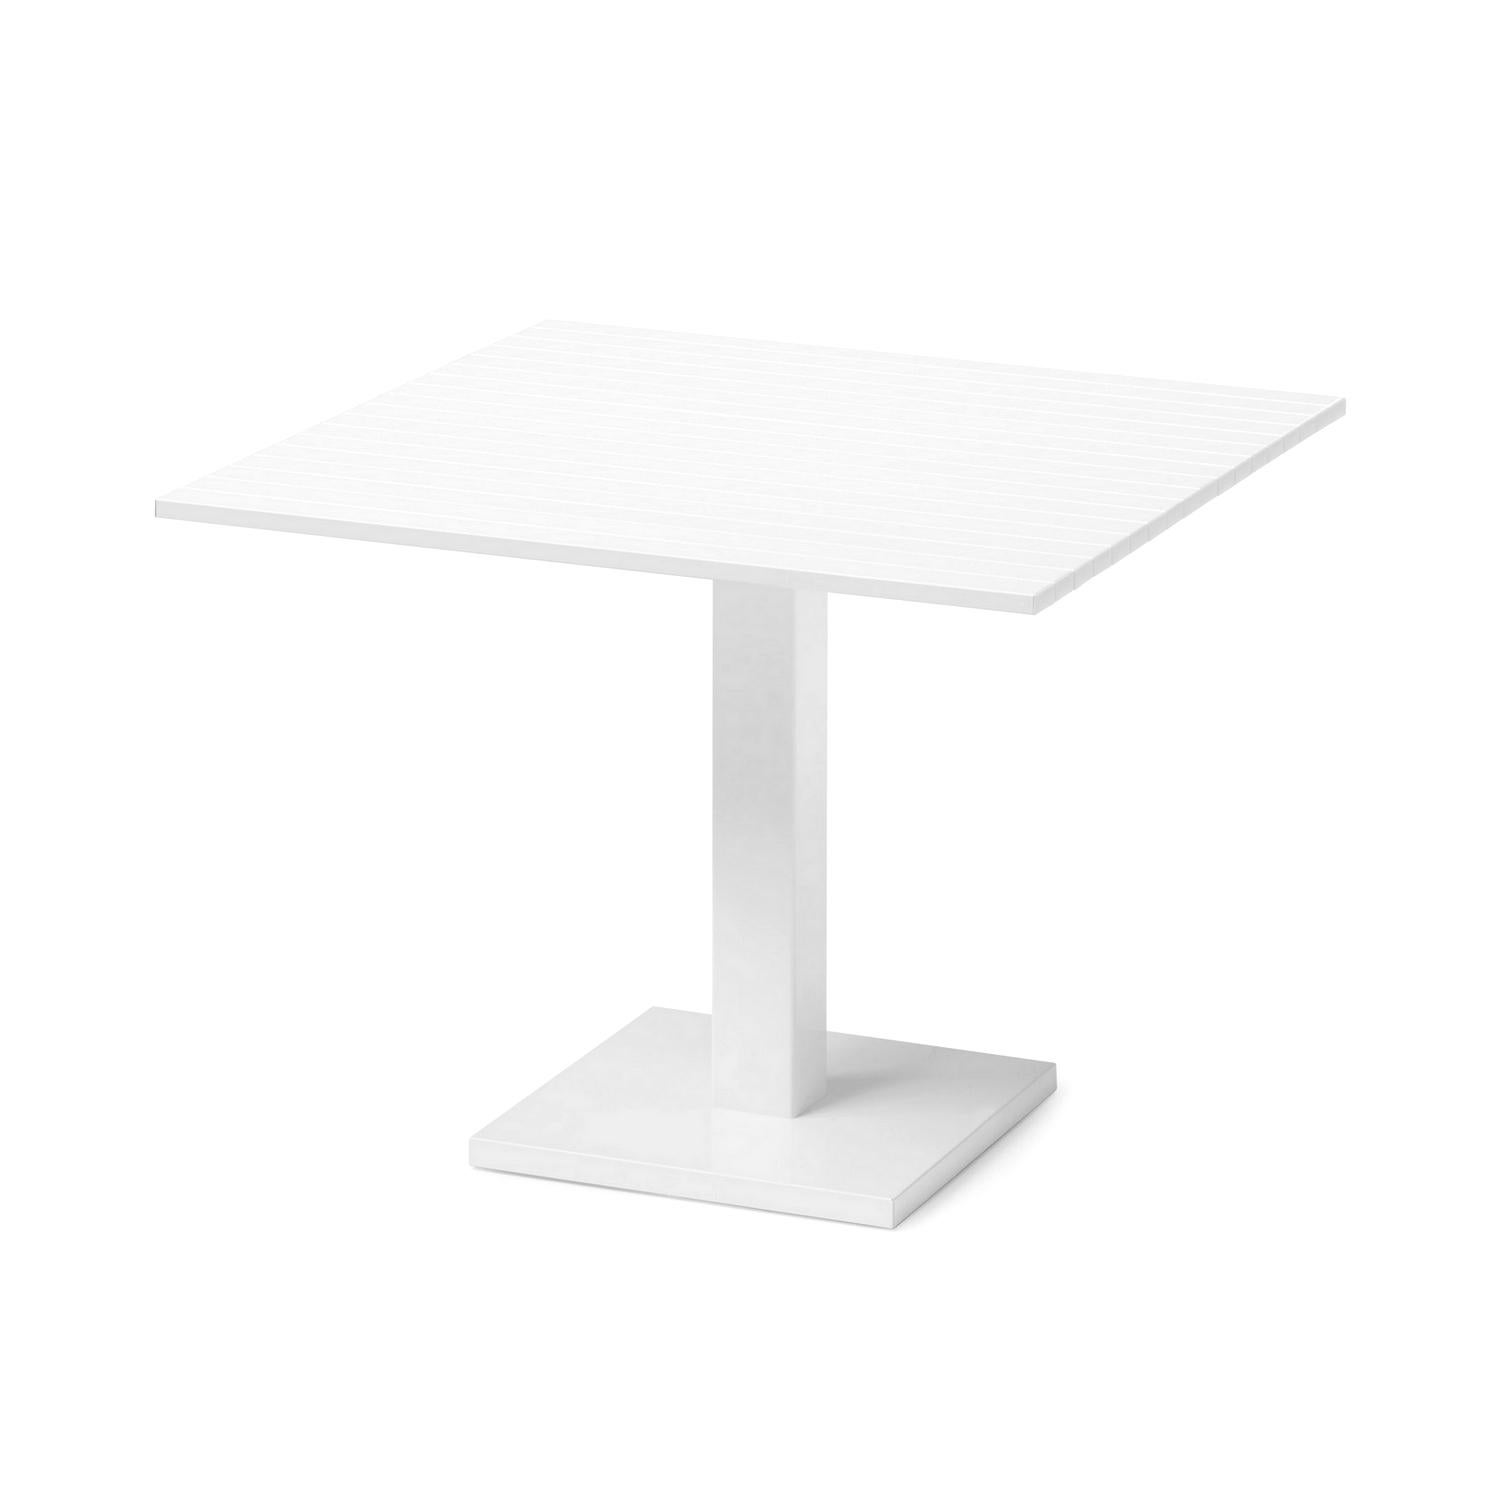 Modern In Stock in Los Angeles, White Lacquered Aluminium Outdoor Orione Table